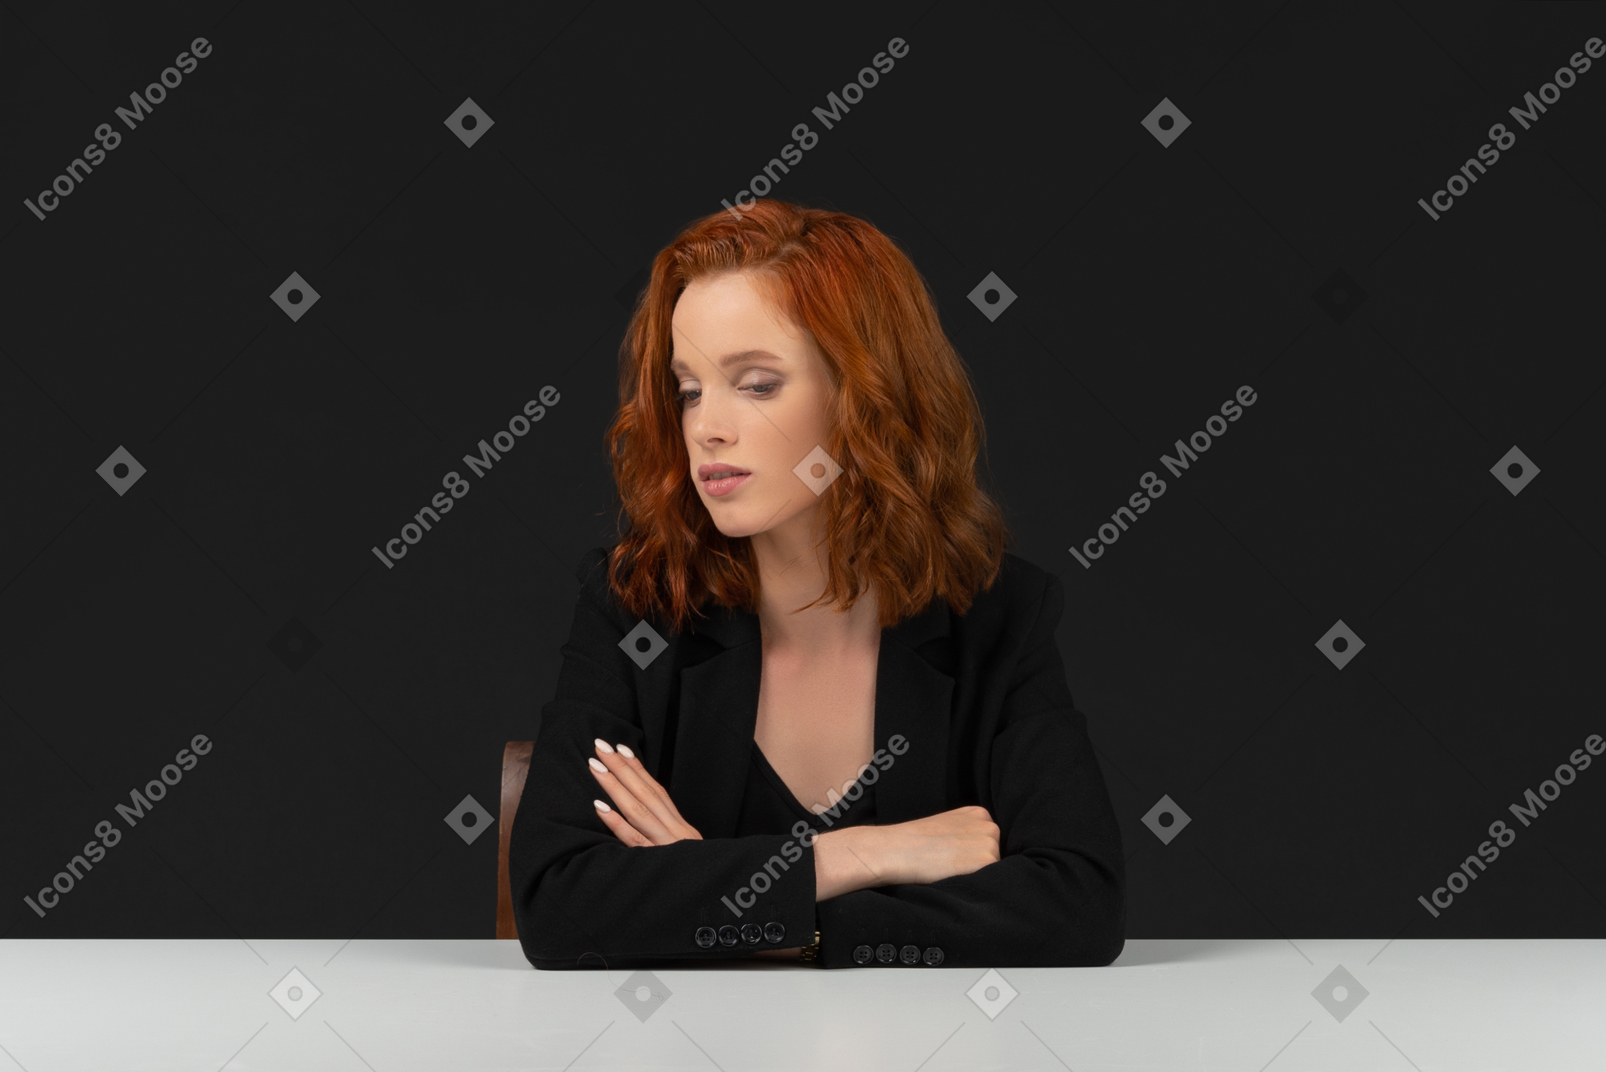 A frontal view of the pretty young woman sitting at the table with closed eyes